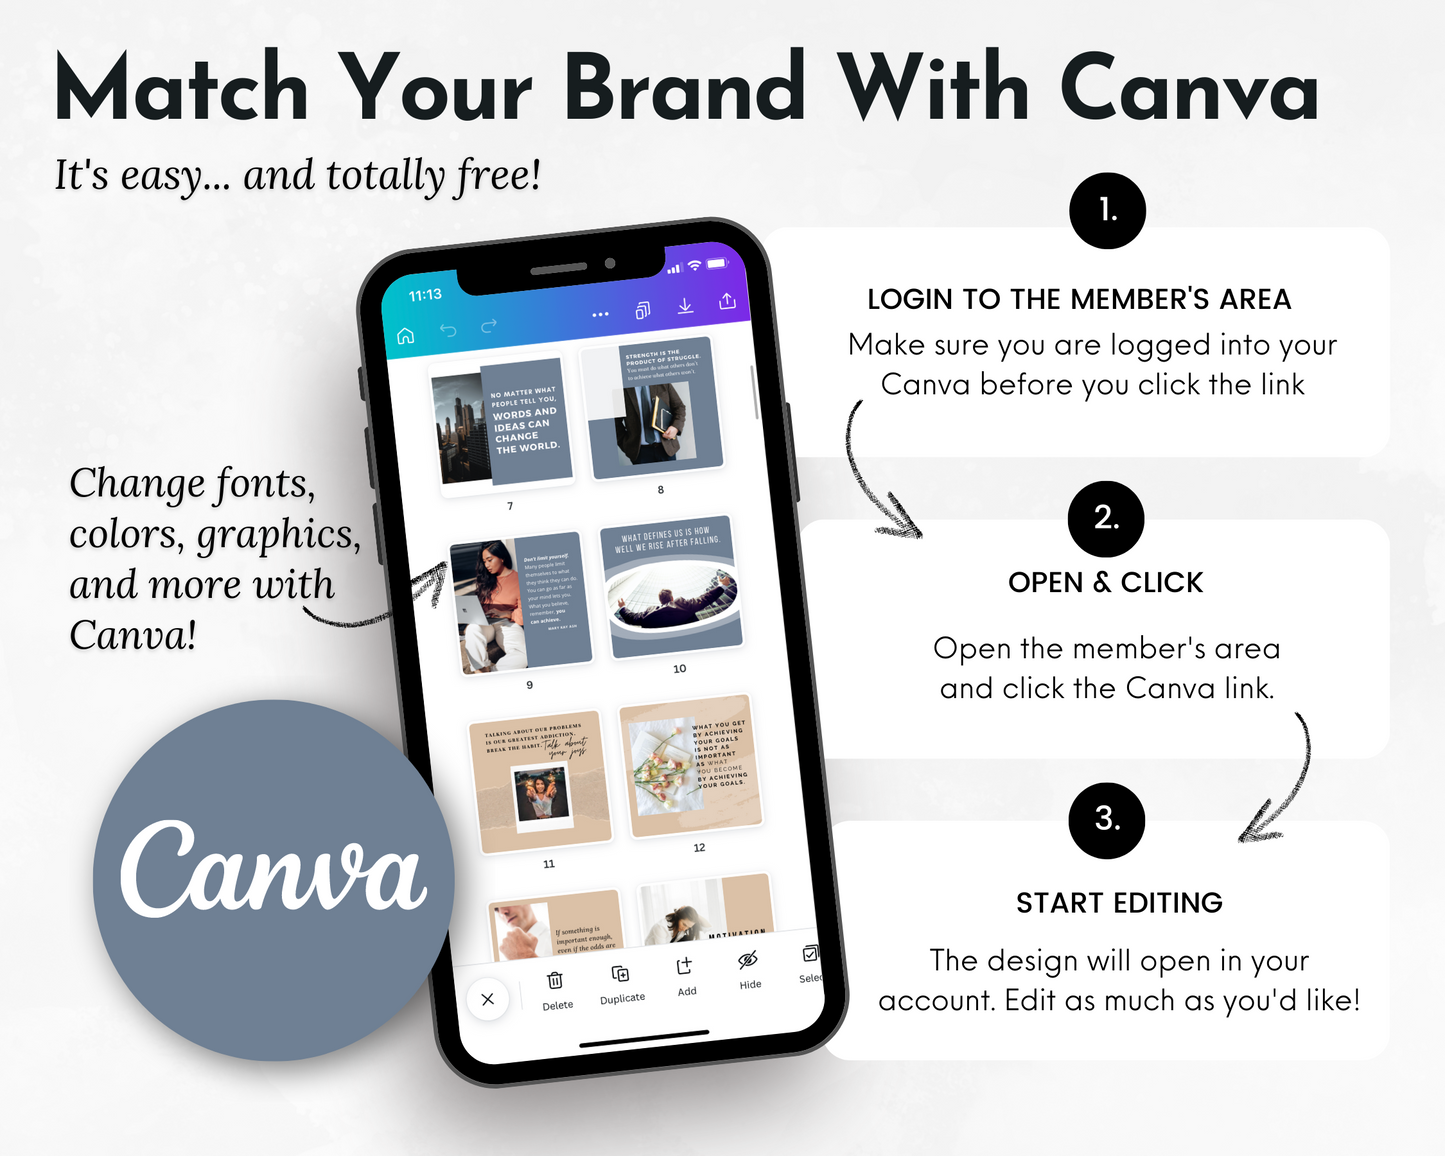 Enhance your brand's reach with captivating social media content and inspirational posts on canvas using the Inspirational Social Media Post Bundle with Canva Templates from Socially Inclined.